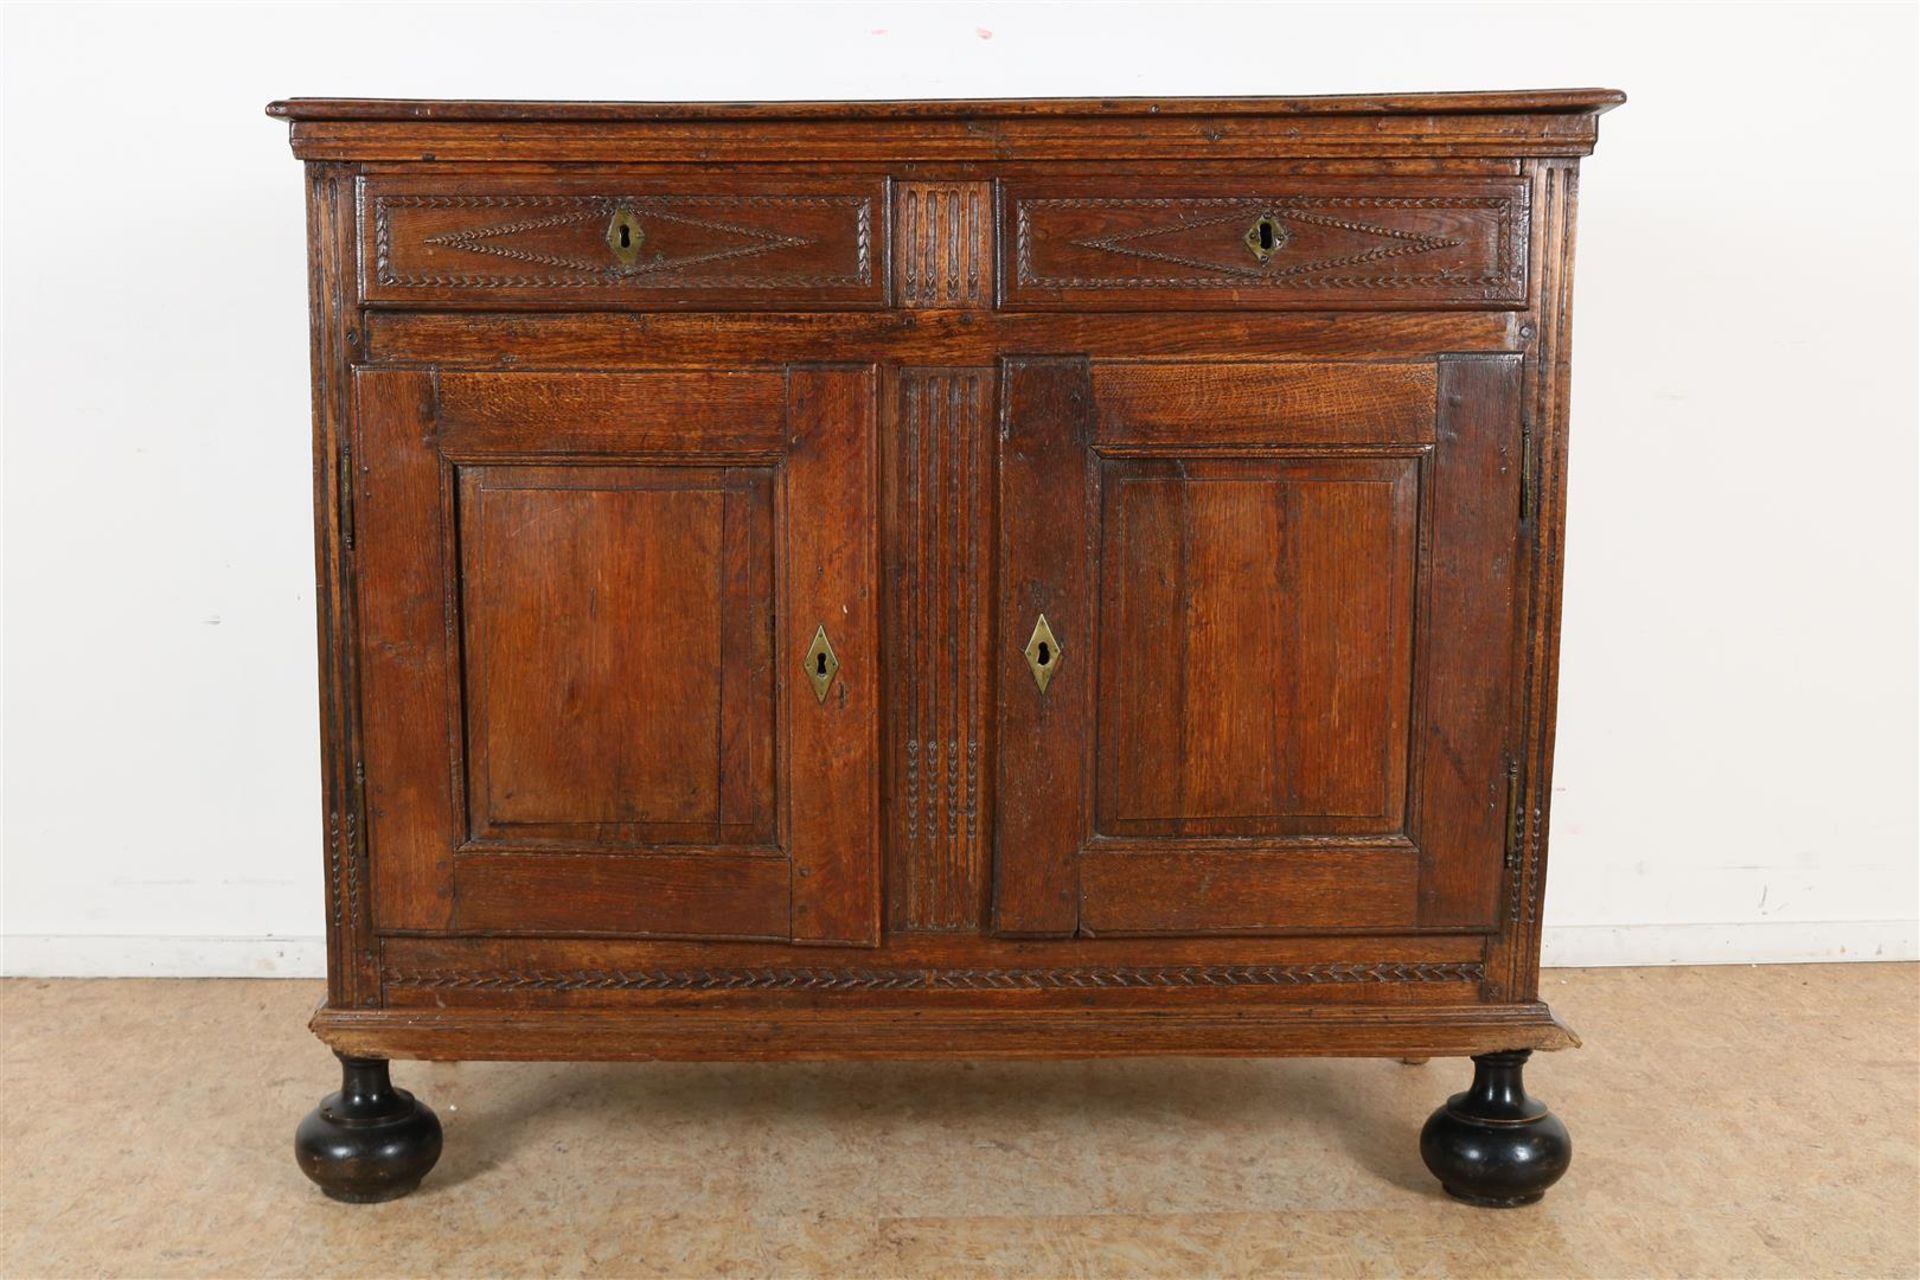 Oak sideboard with 2 inserted drawers and 2 panel doors on ball feet, 18th century, h. 112, w.